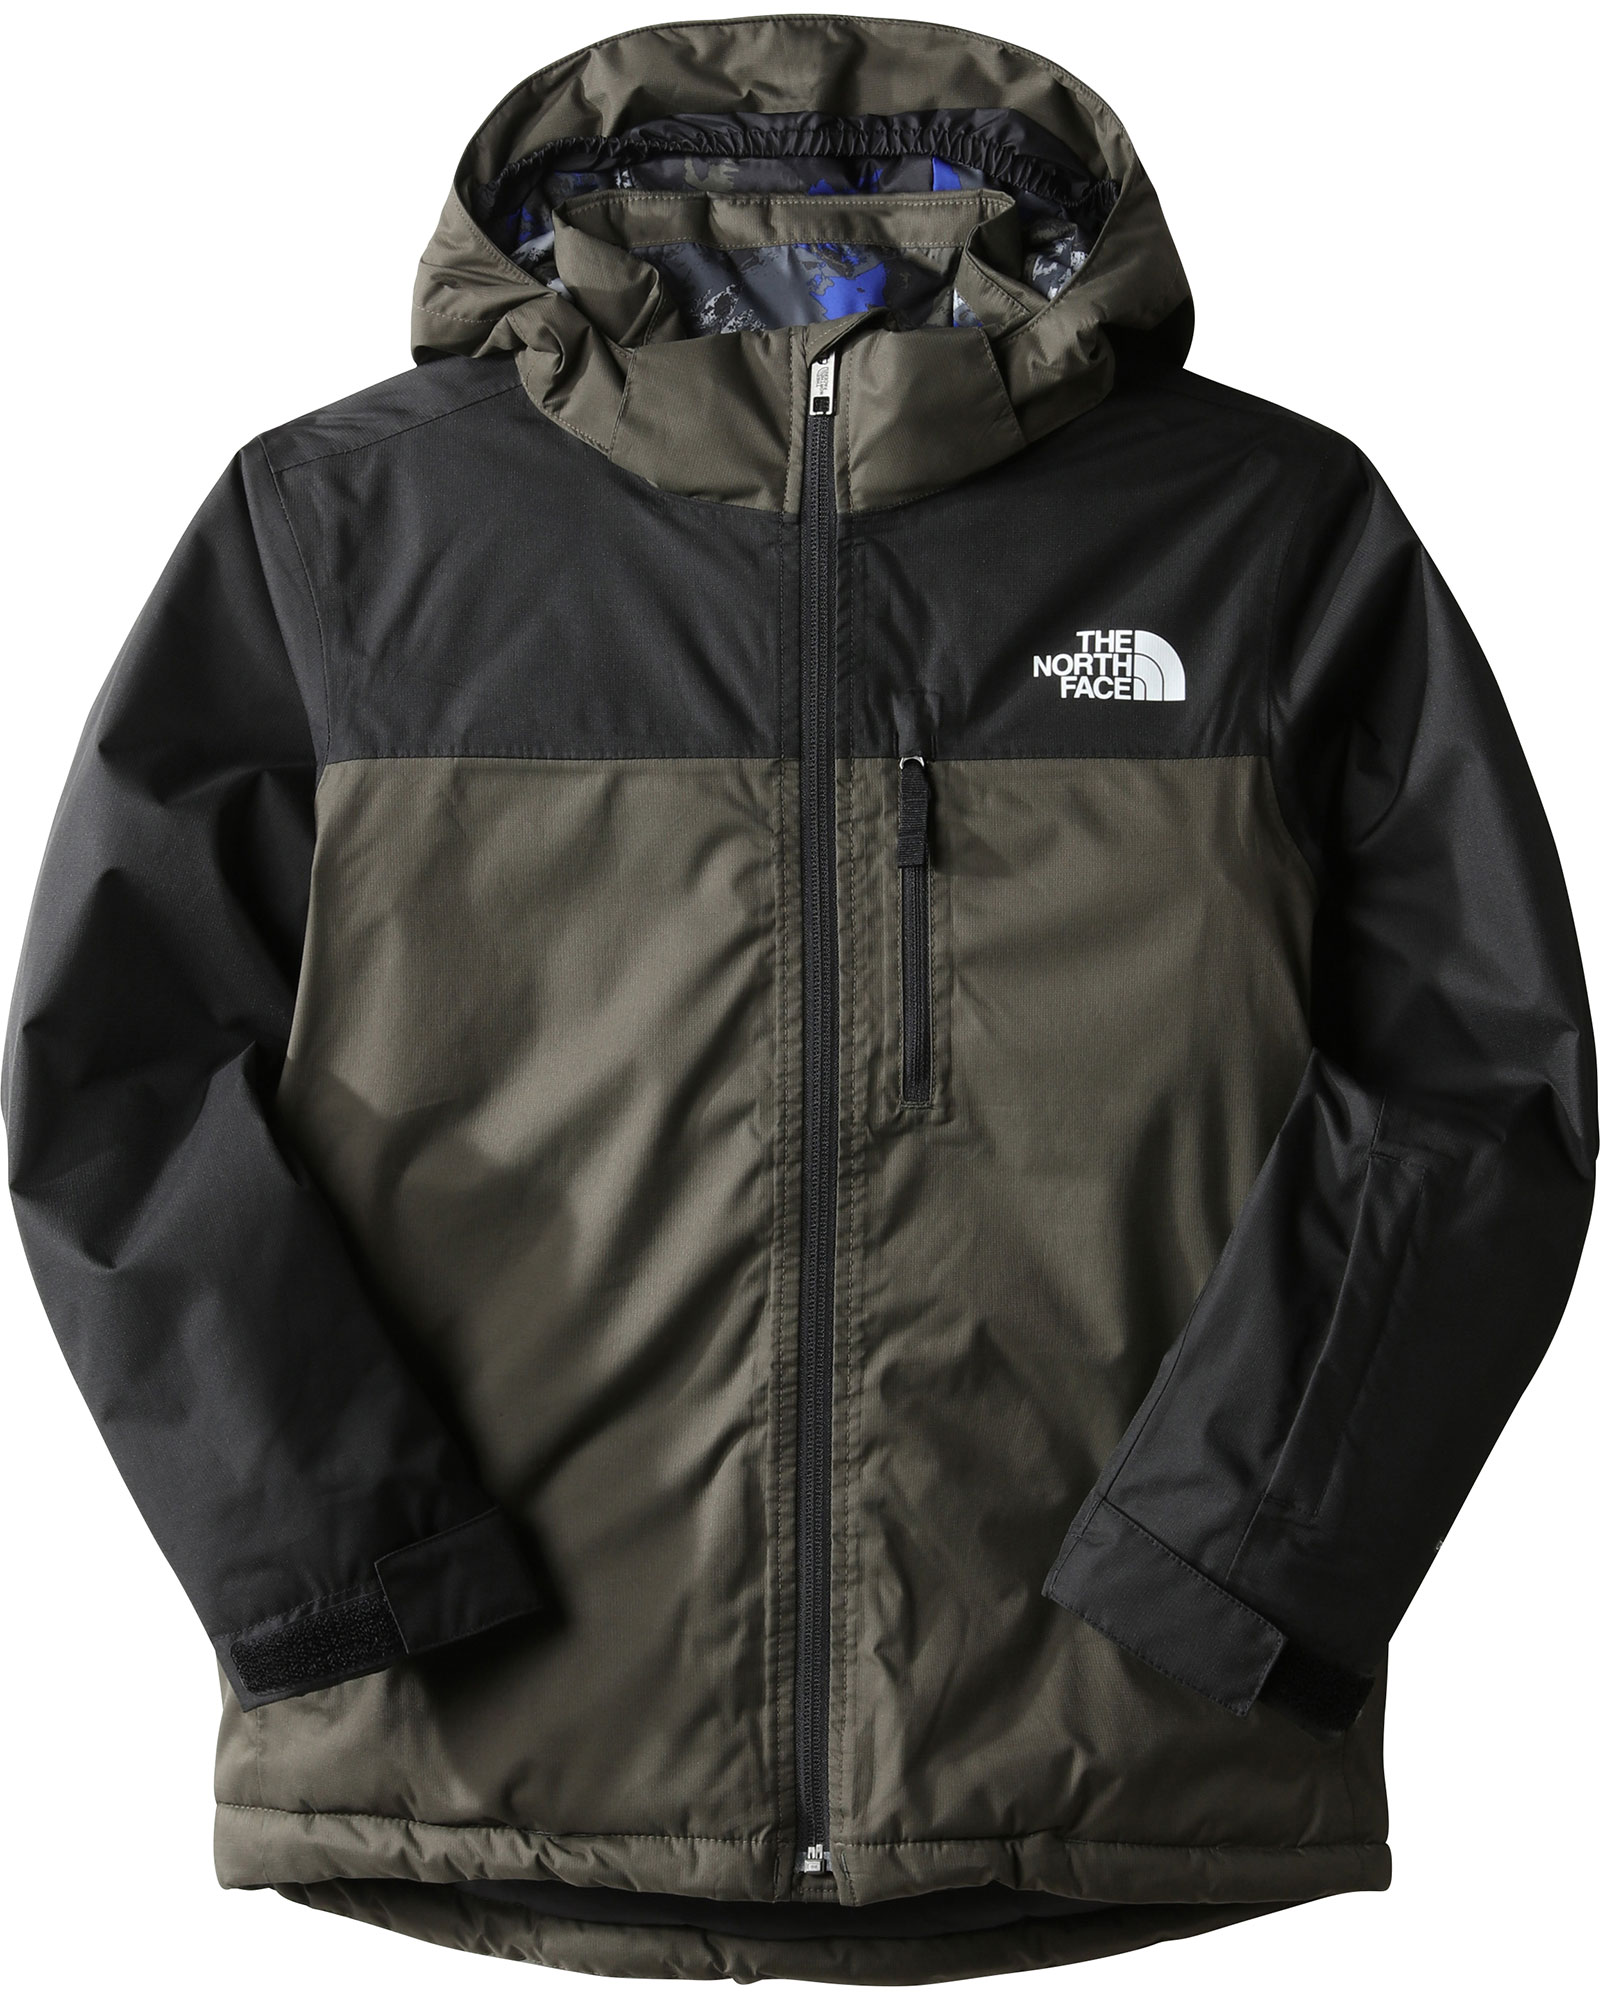 The North Face Teen Snowquest Plus Kids’ Insulated Jacket - New Taupe Green S